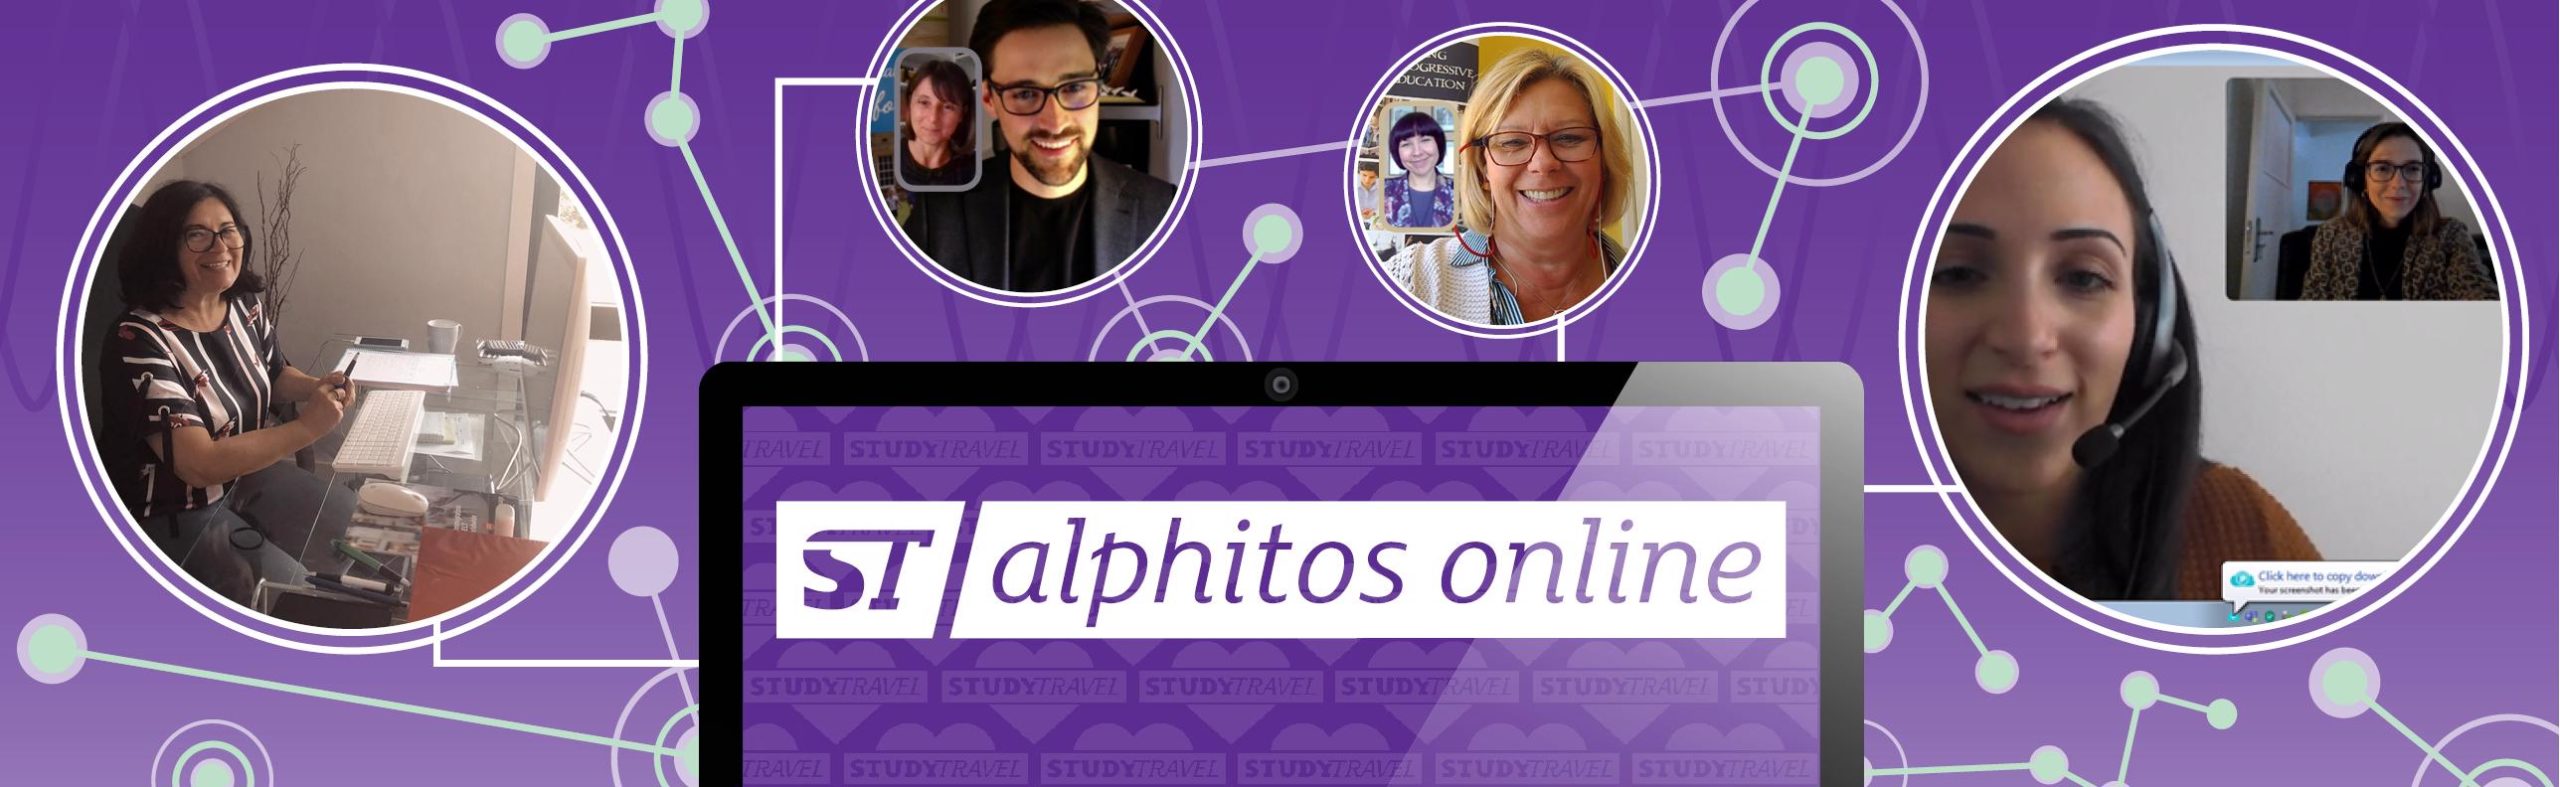 Workshops: From Alphe to Alphitos. A quick reaction to social distancing